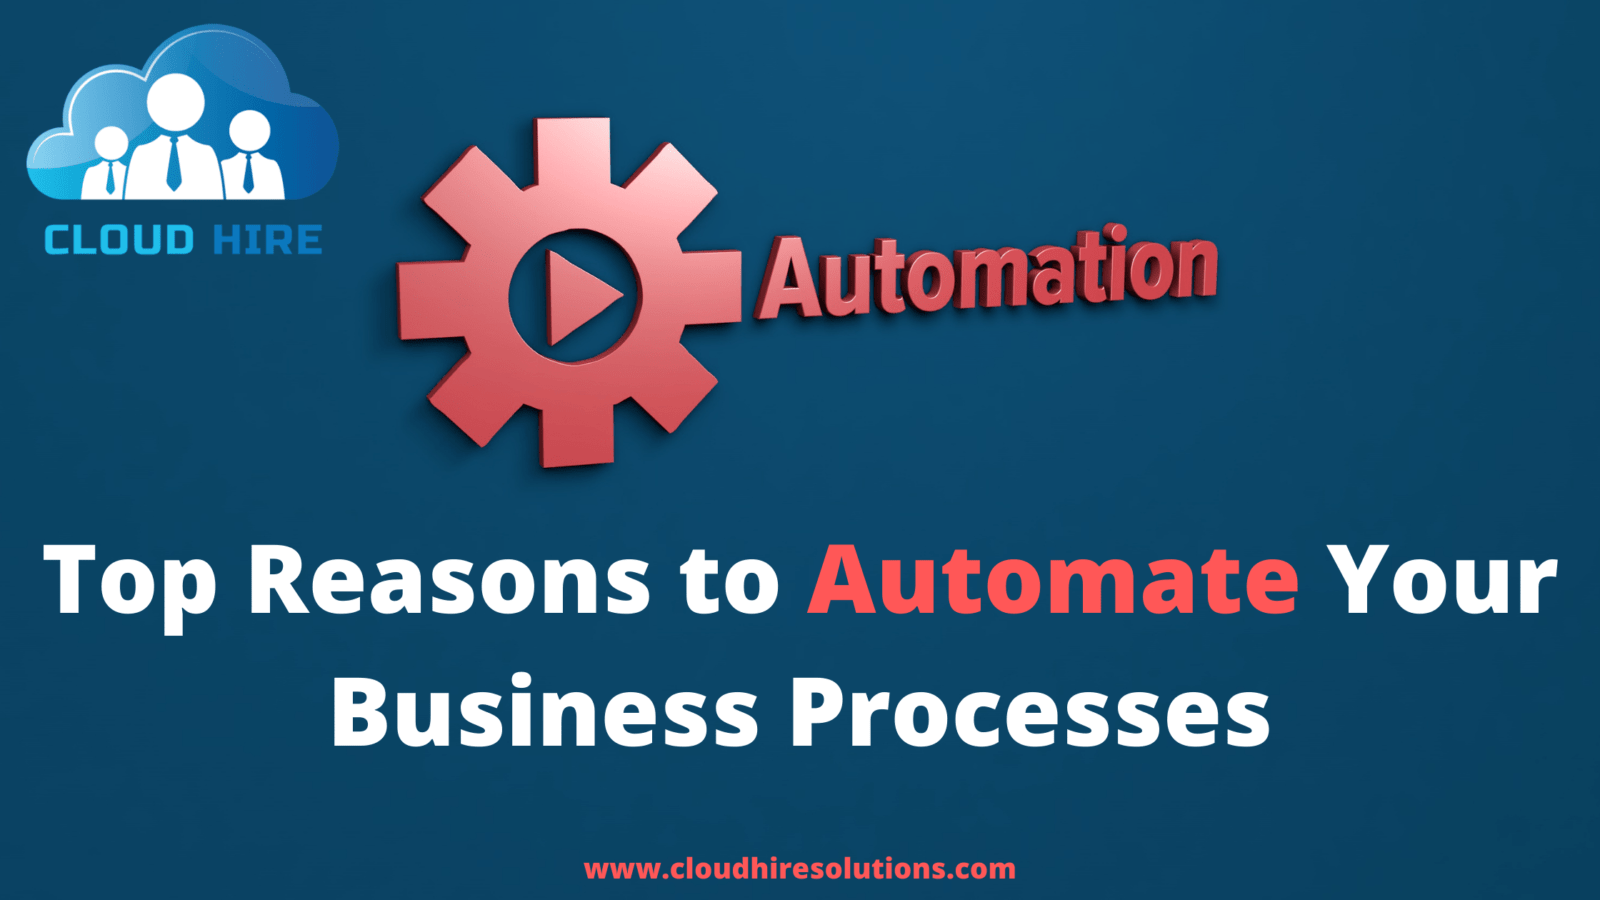 Top Reasons to Automate Your Business Processes